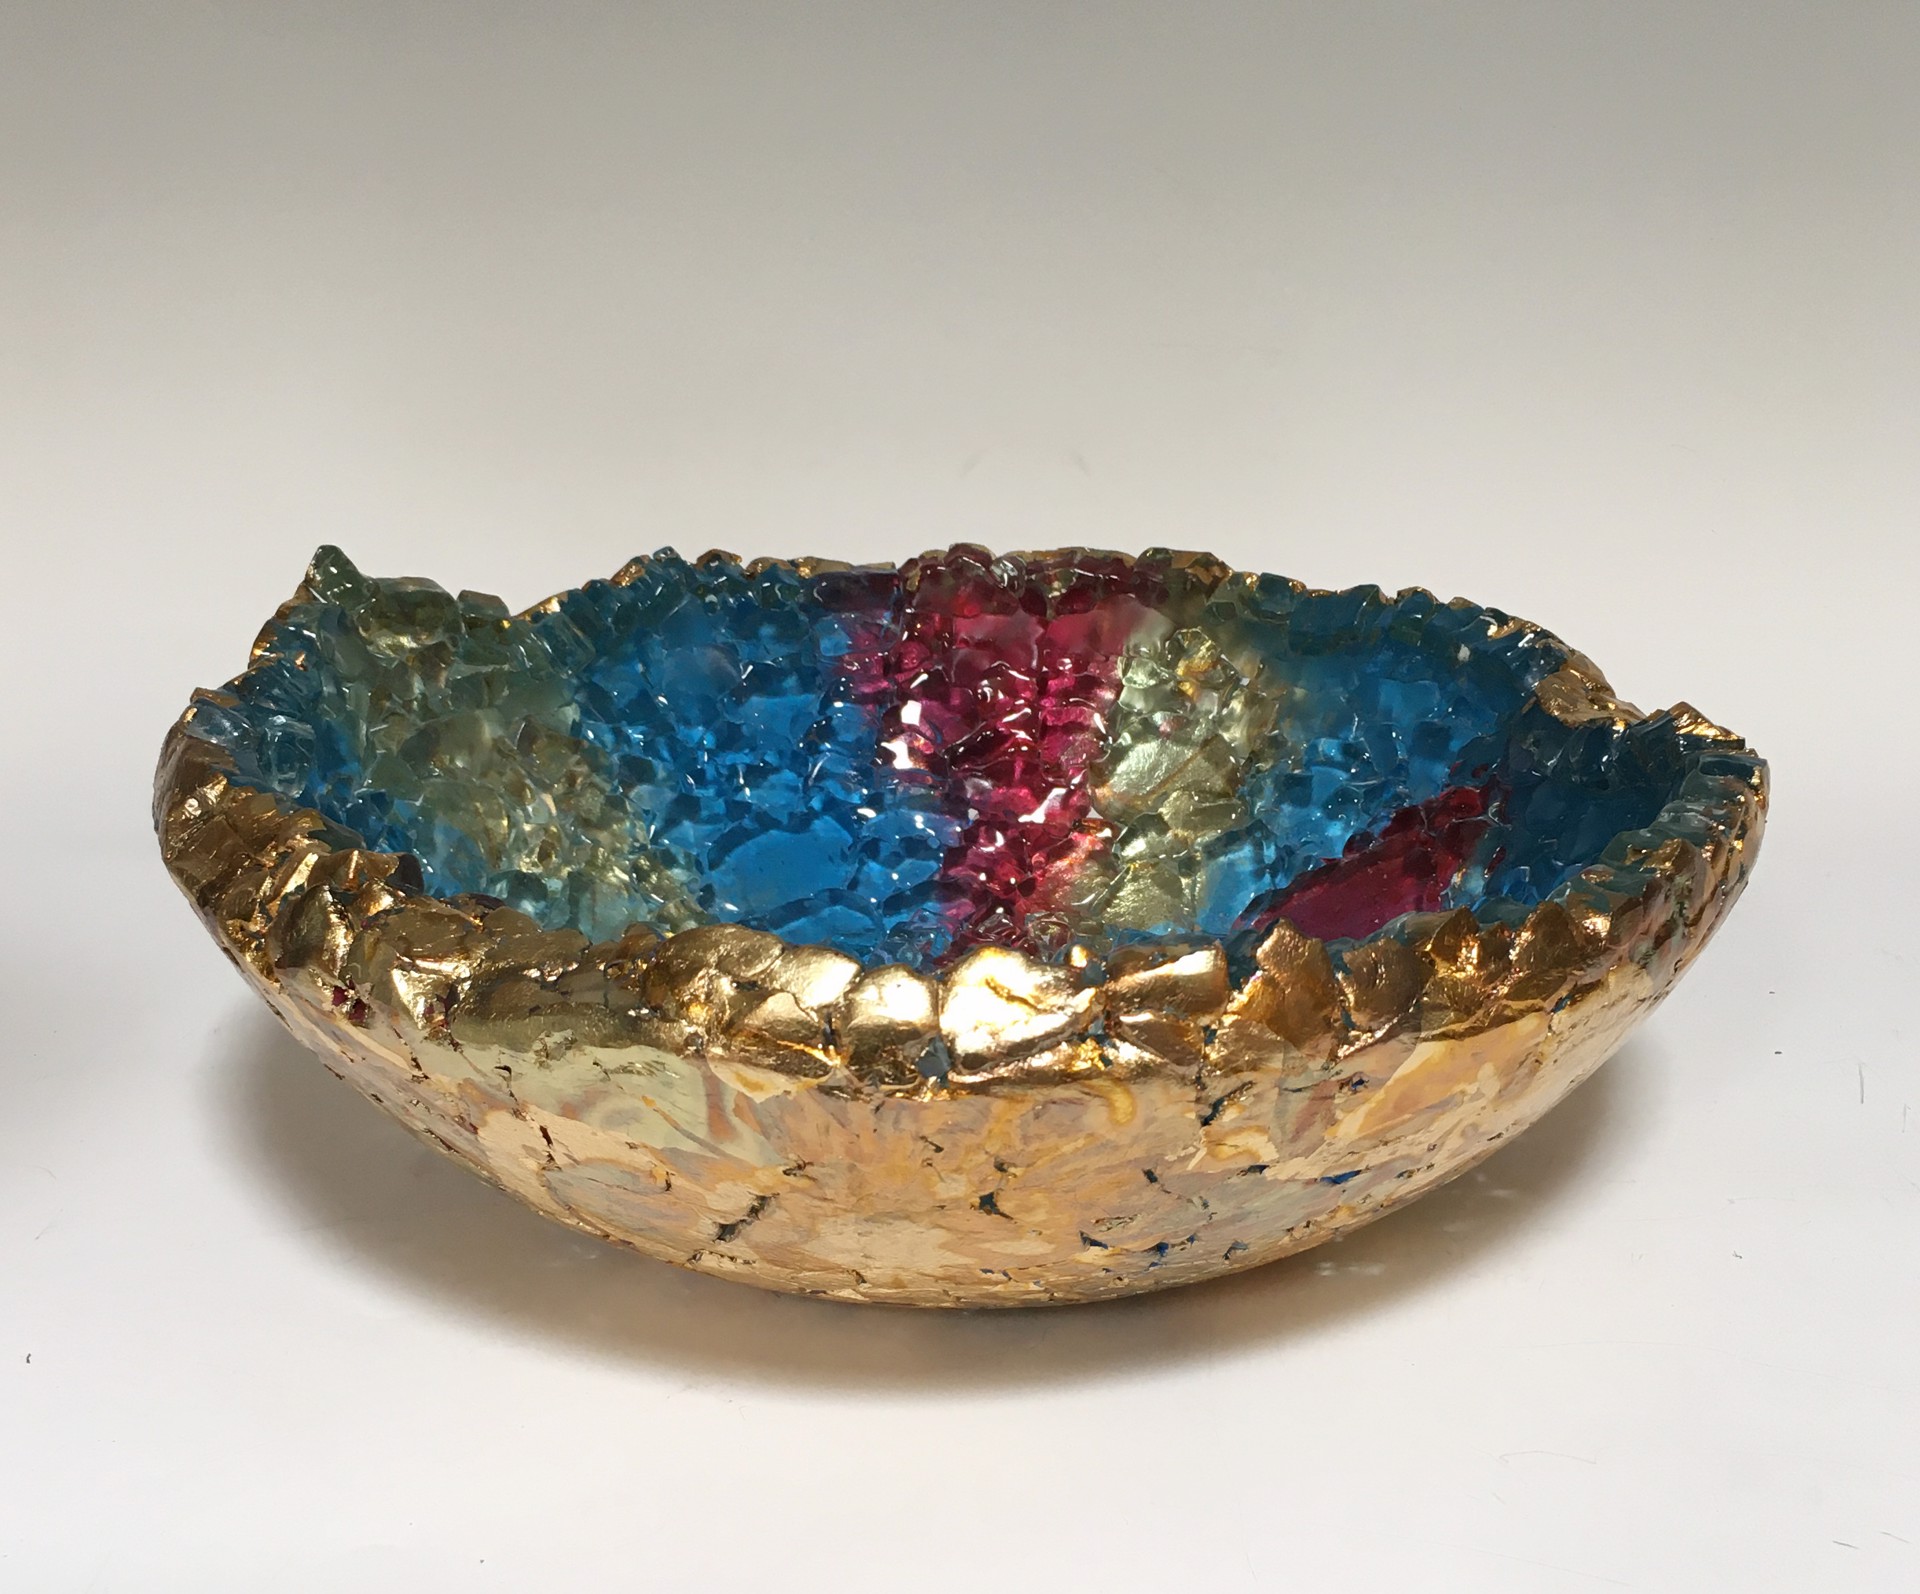 Crimson and Sky Blue Vessel by Mira Woodworth